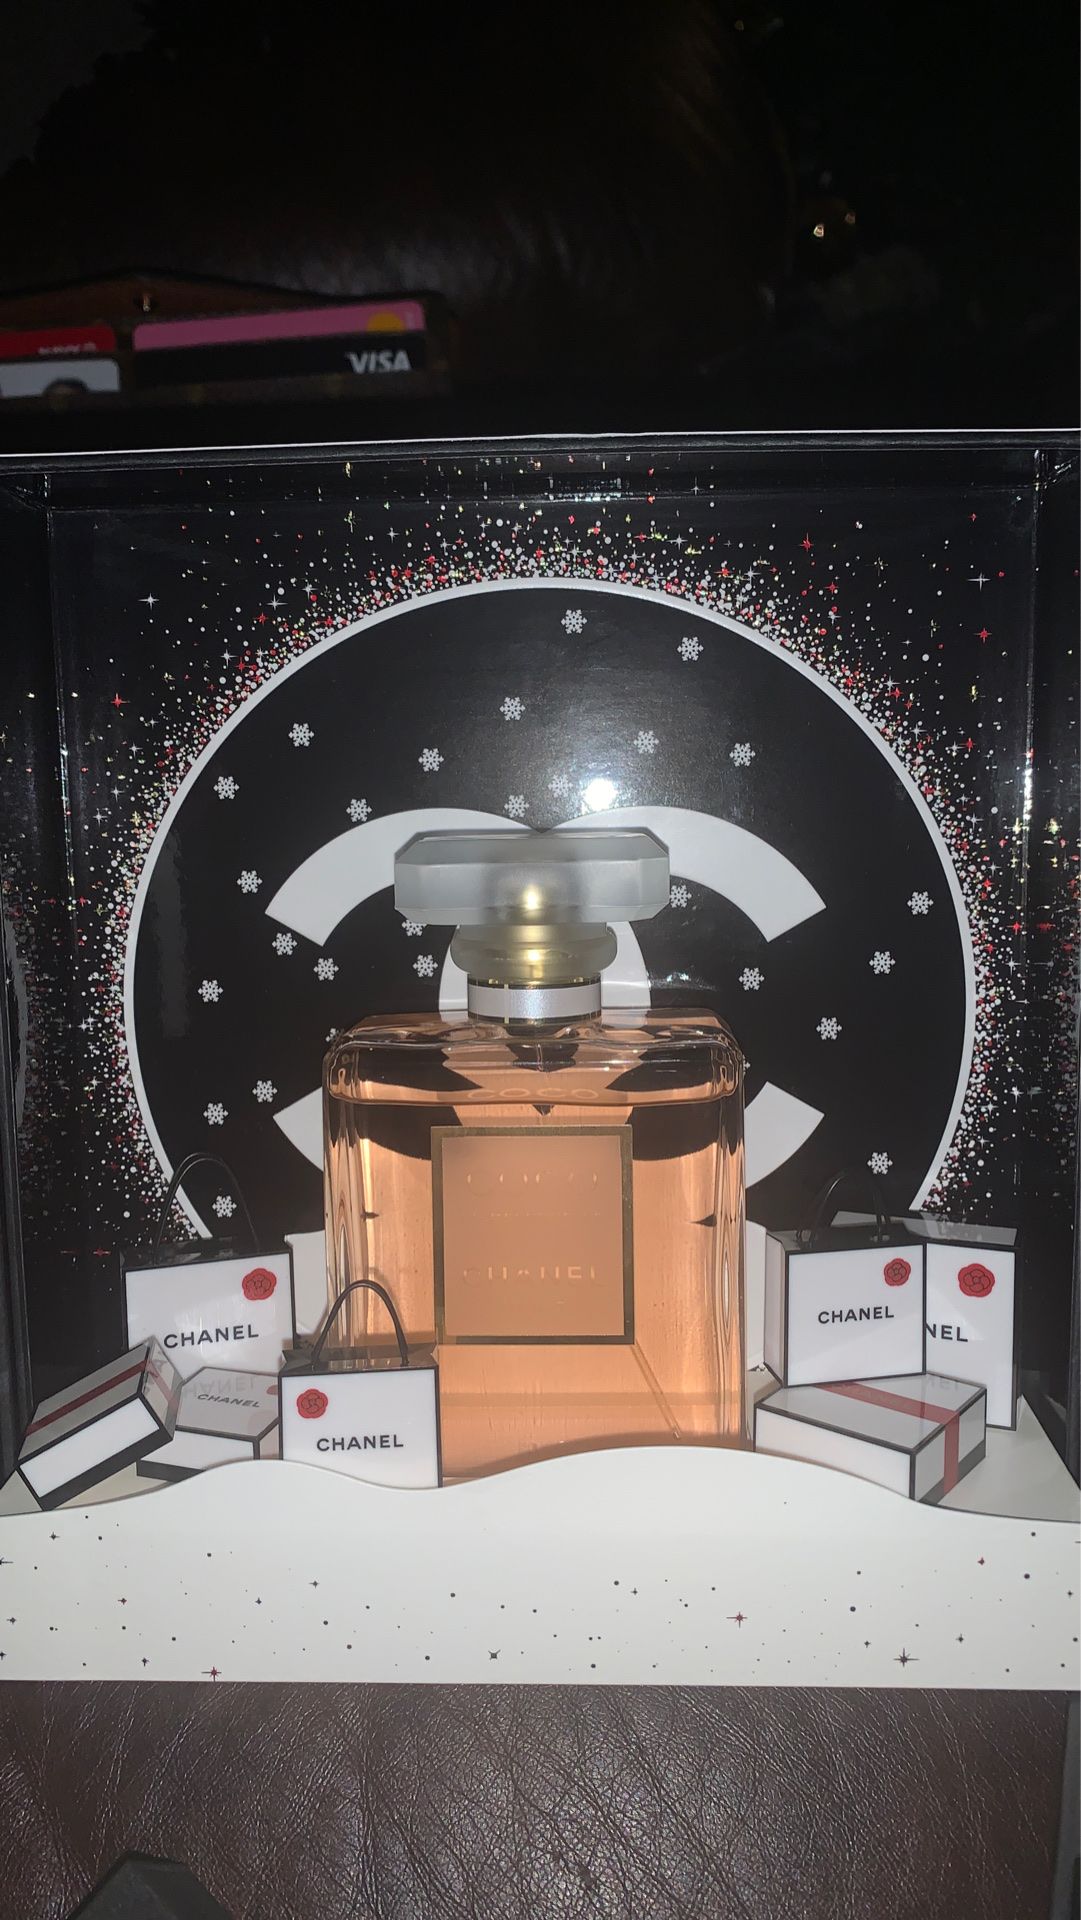 New in a BOX Coco Chanel Mademoiselle perfume